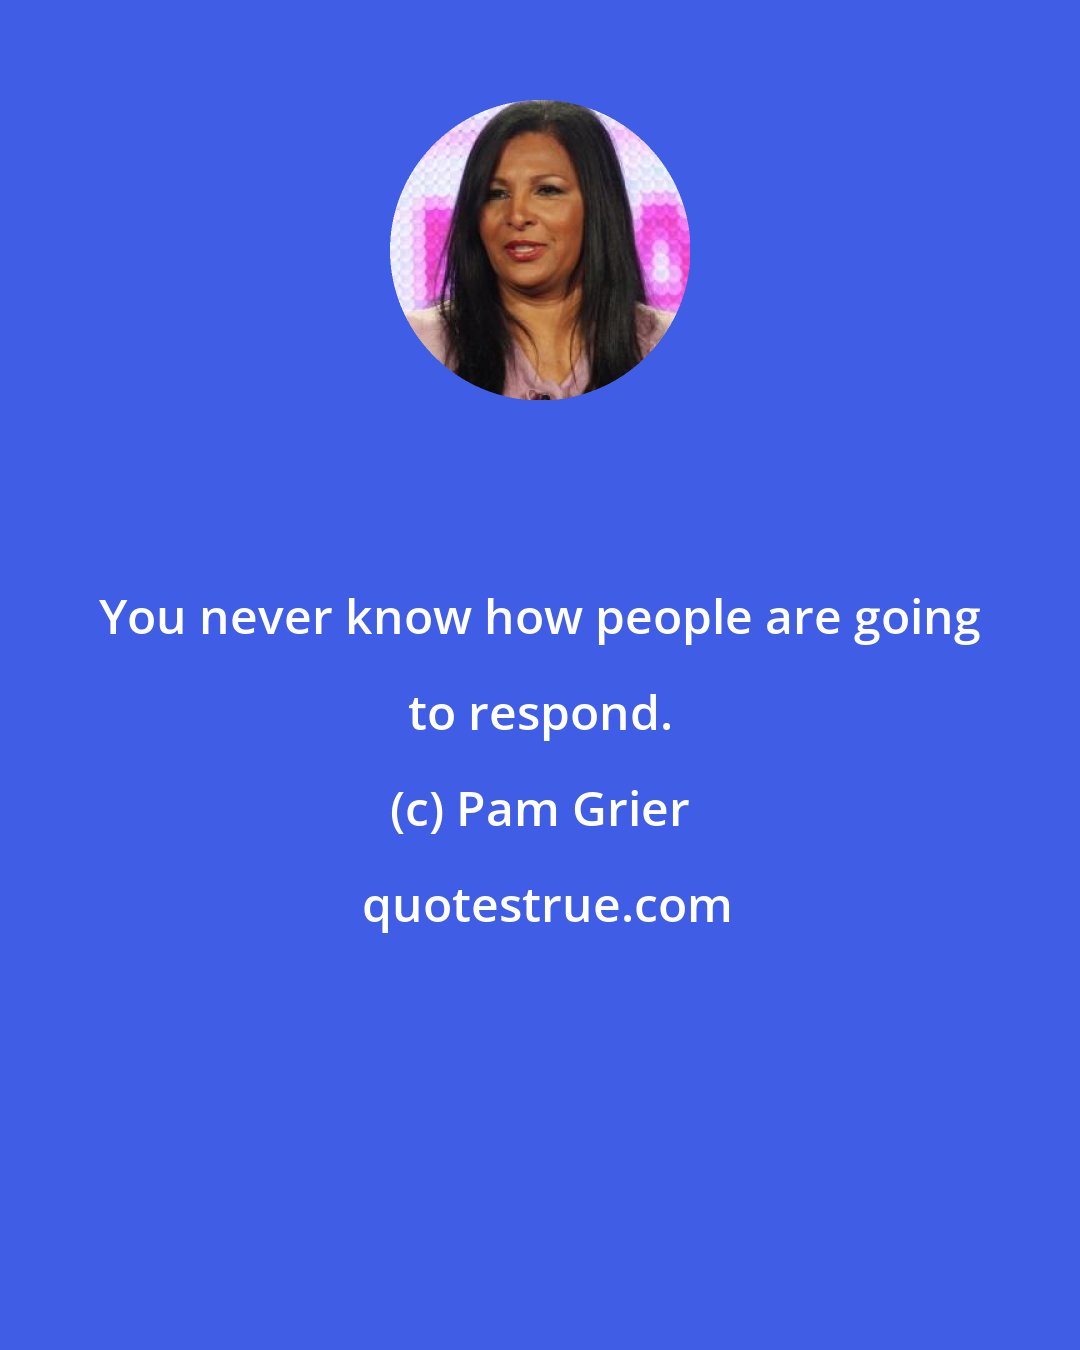 Pam Grier: You never know how people are going to respond.